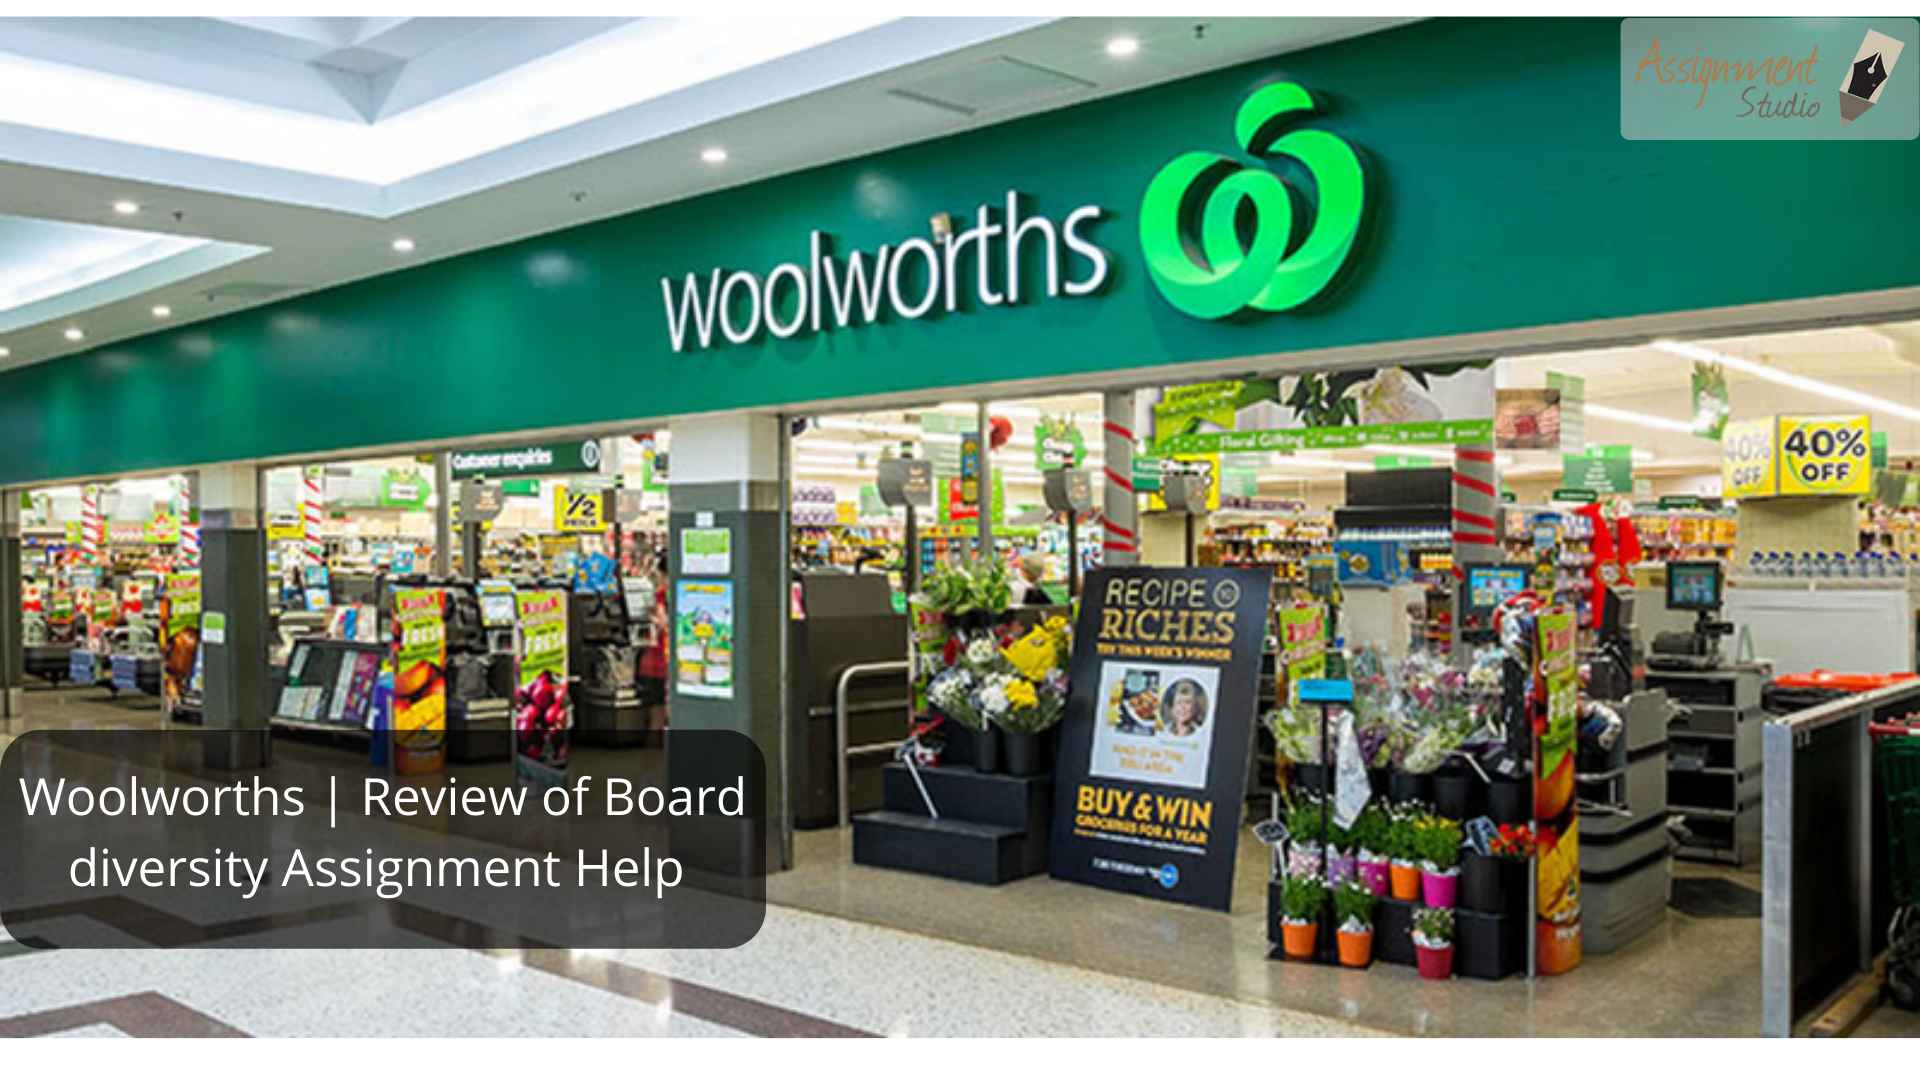 WOOLWORTHS - review of board diversity assignment help